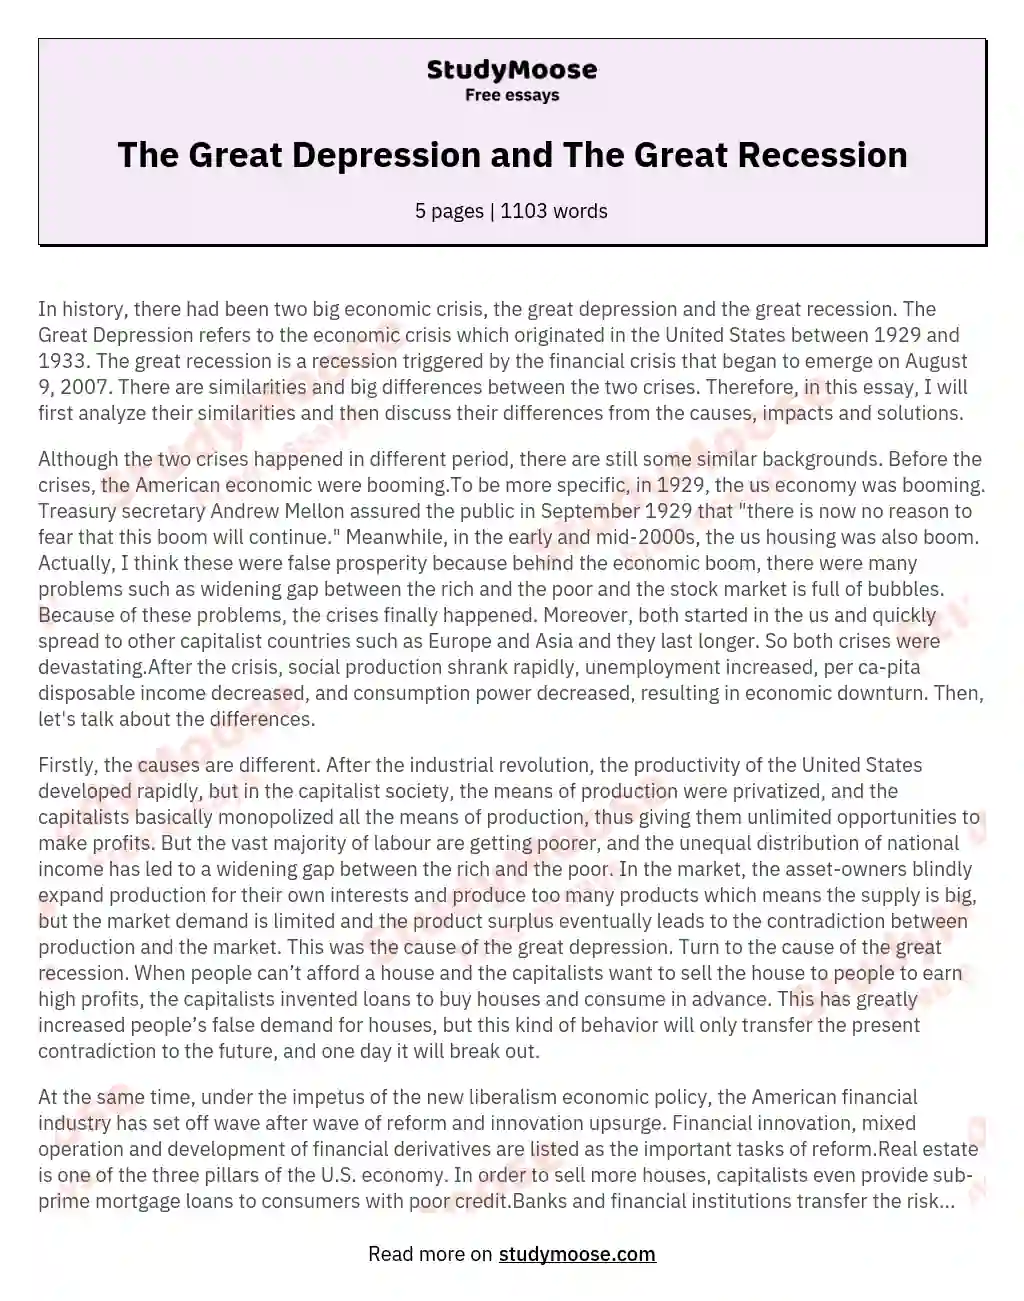 essay questions on the great depression